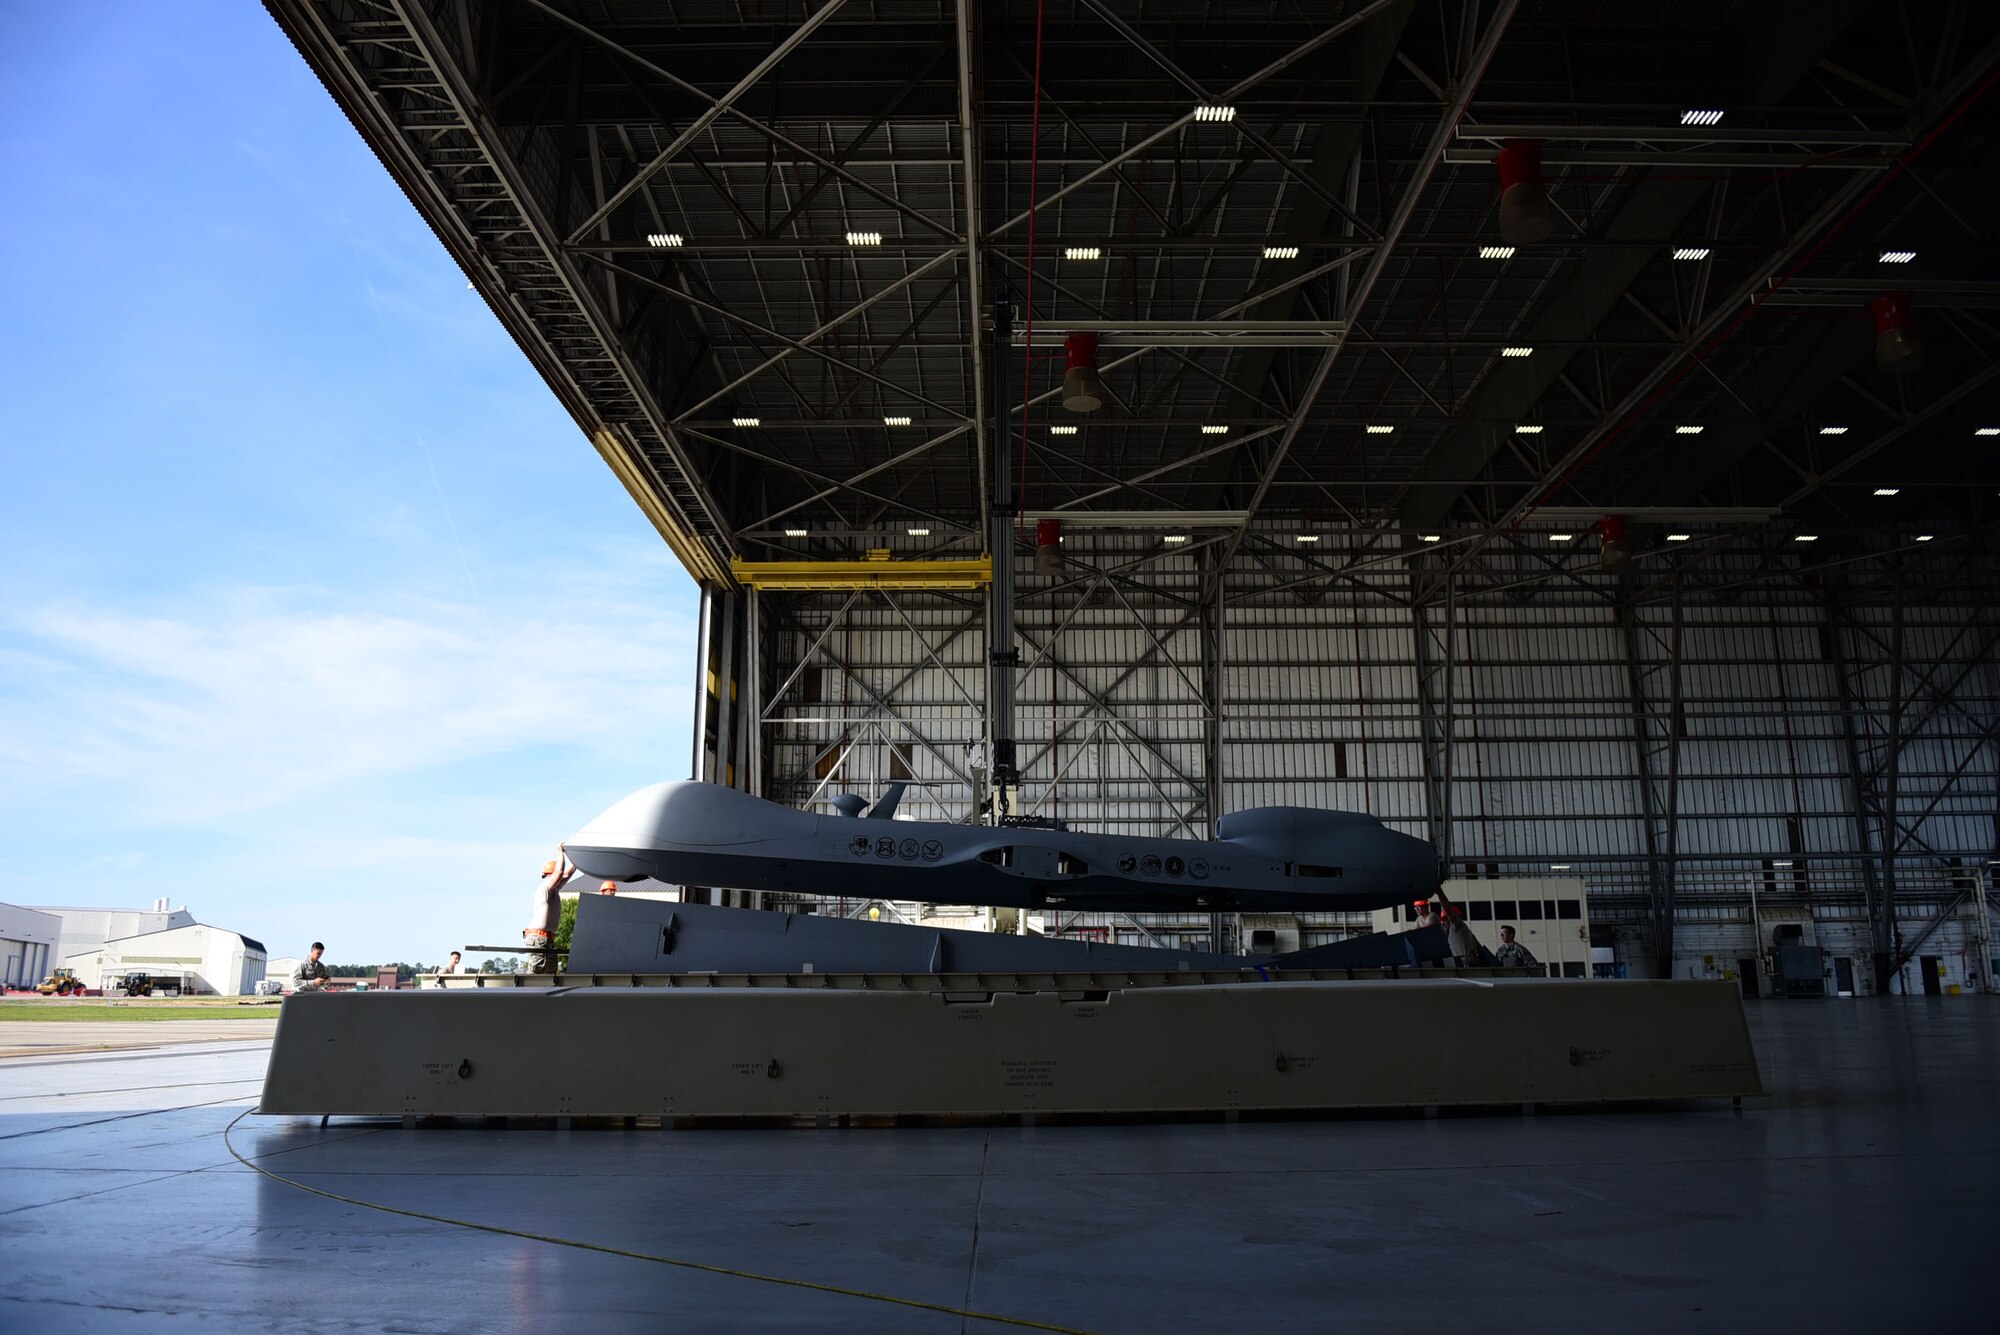 Airmen from the 432nd Wing/432nd Air Expeditionary Wing assemble an MQ-9 Reaper for display at the Joint Base Charleston Air & Space Expo April 26, 2018, at JB Charleston, S.C. The air show provided the opportunity to educate the public on combat Remotely Piloted Aircraft capabilities and operations. (U.S. Air Force photo by Senior Airman Christian Clausen)